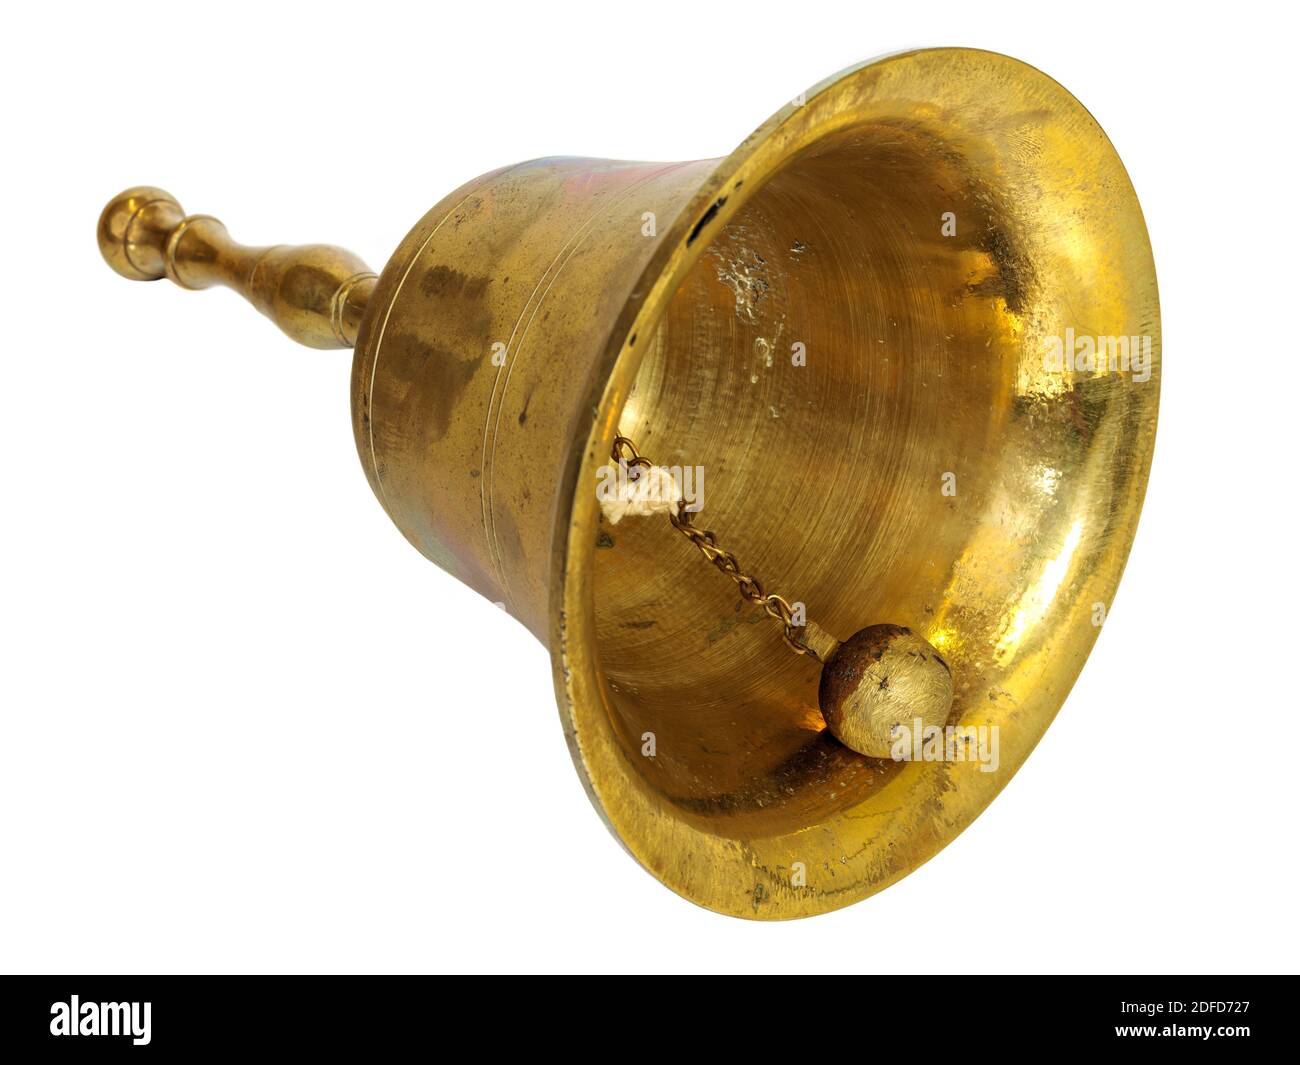 Antique brass hand bell isolated on a white background Stock Photo